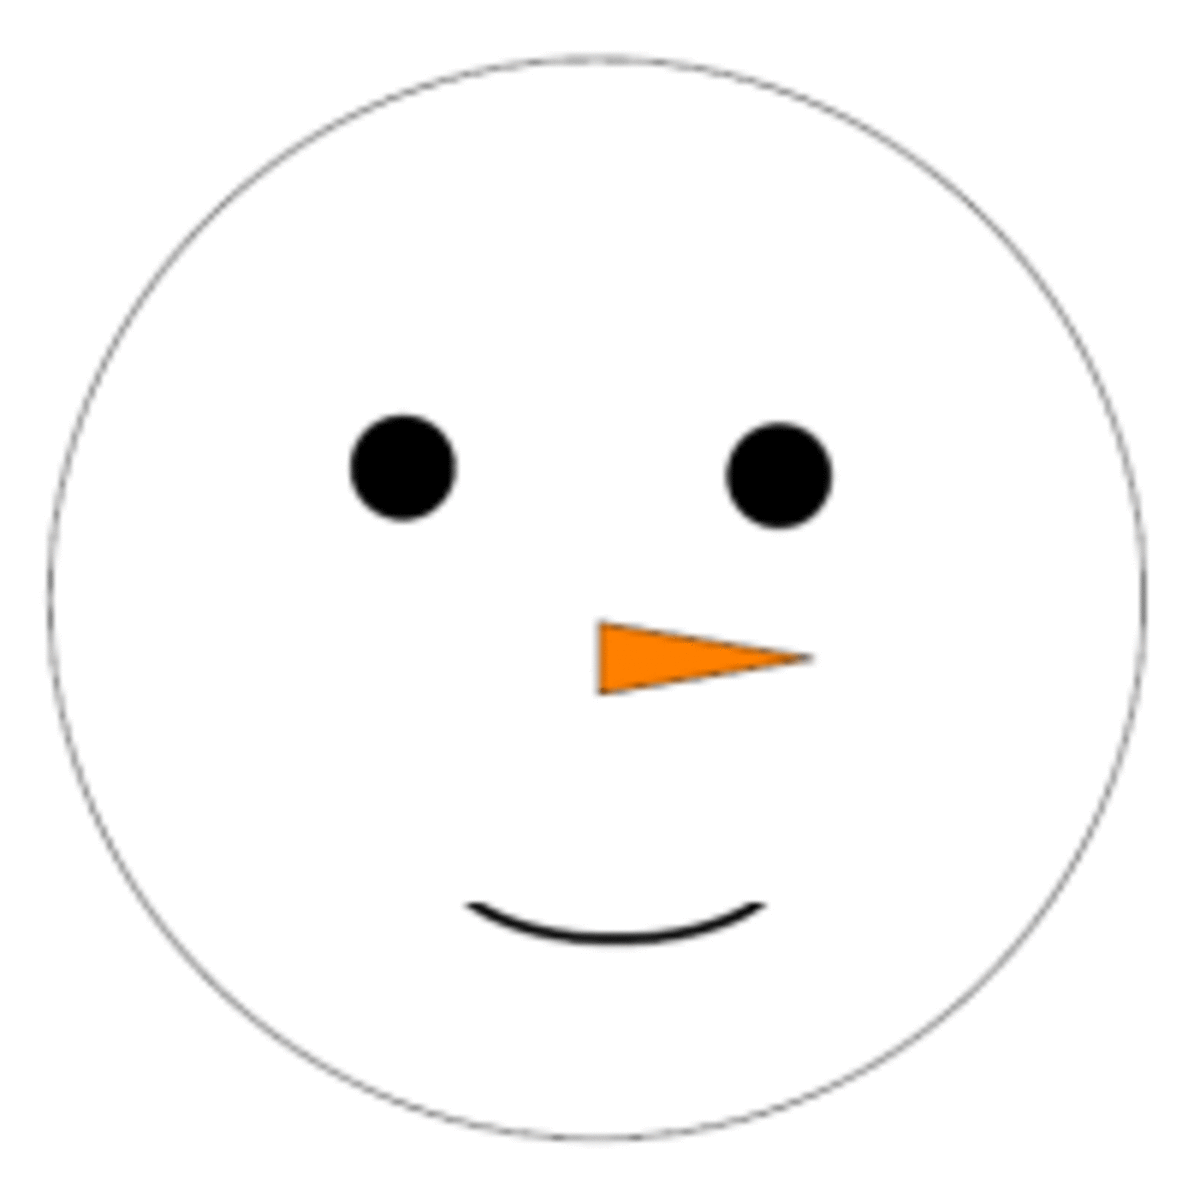 Activity Village has lots of printable games with a Christmas and Winter theme, like this Pin The Nose On The Snowman